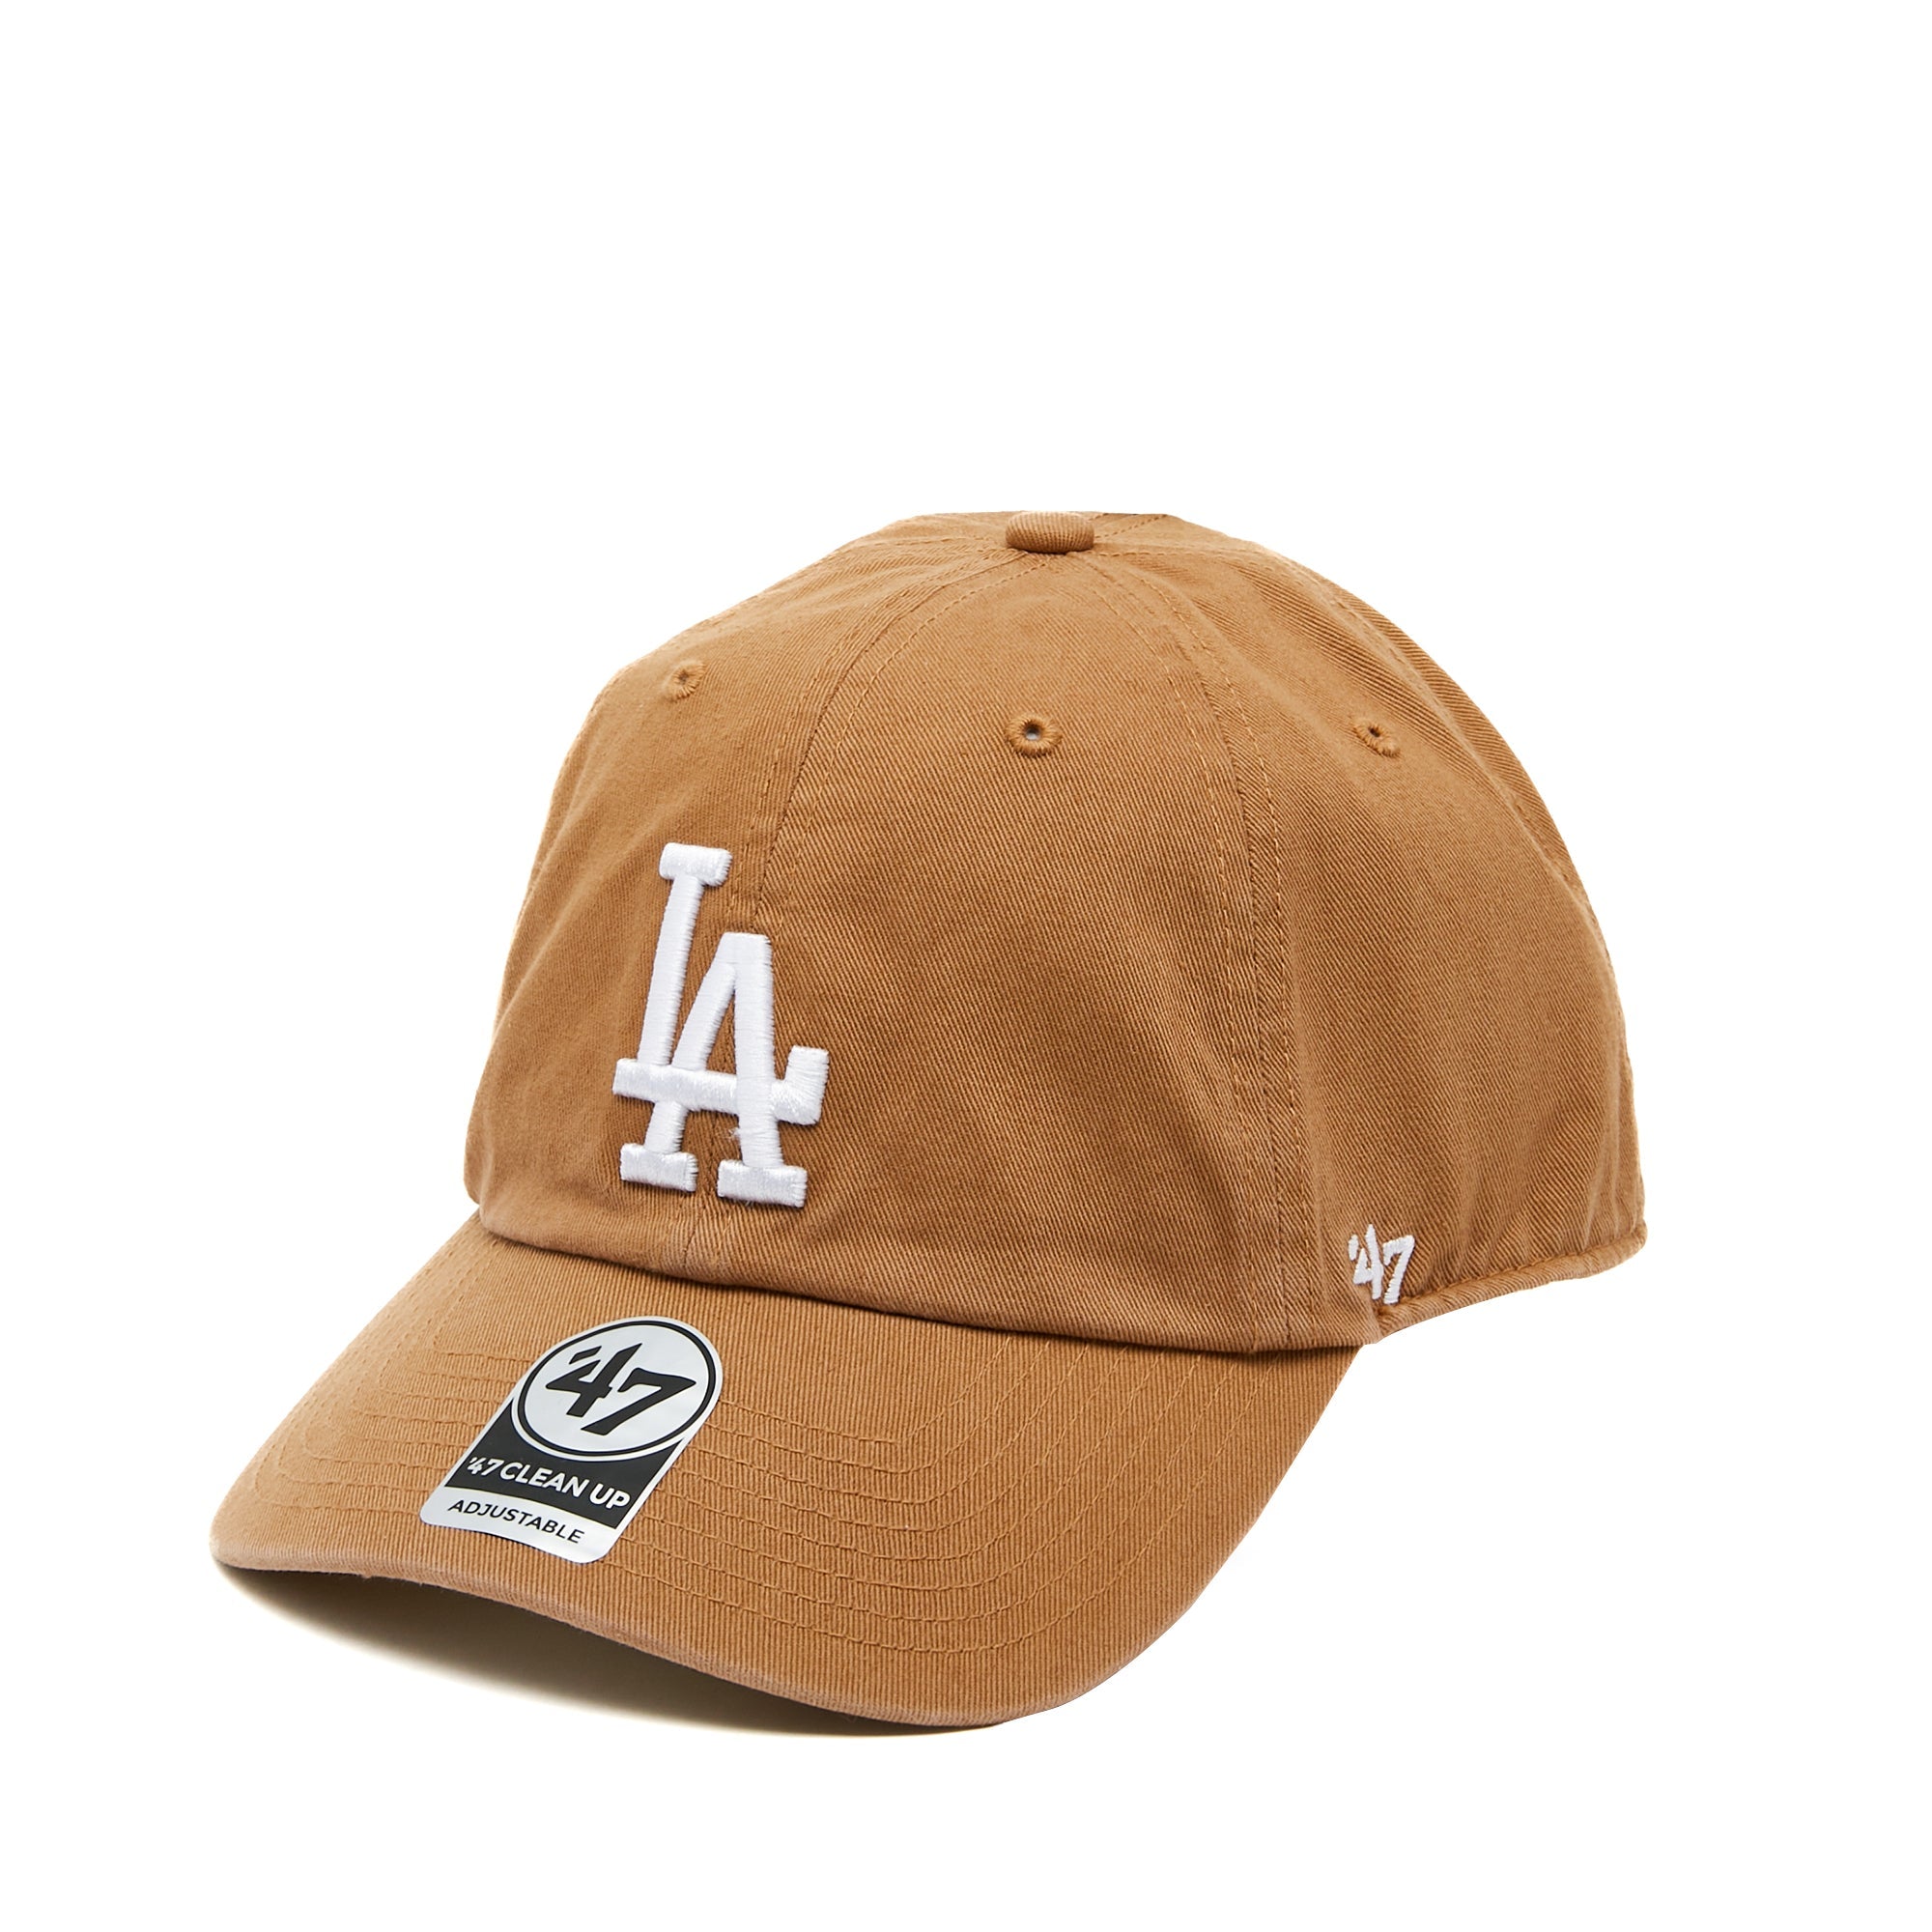 MLB Los Angeles Dodgers '47 Clean Up Cap Camel One Size